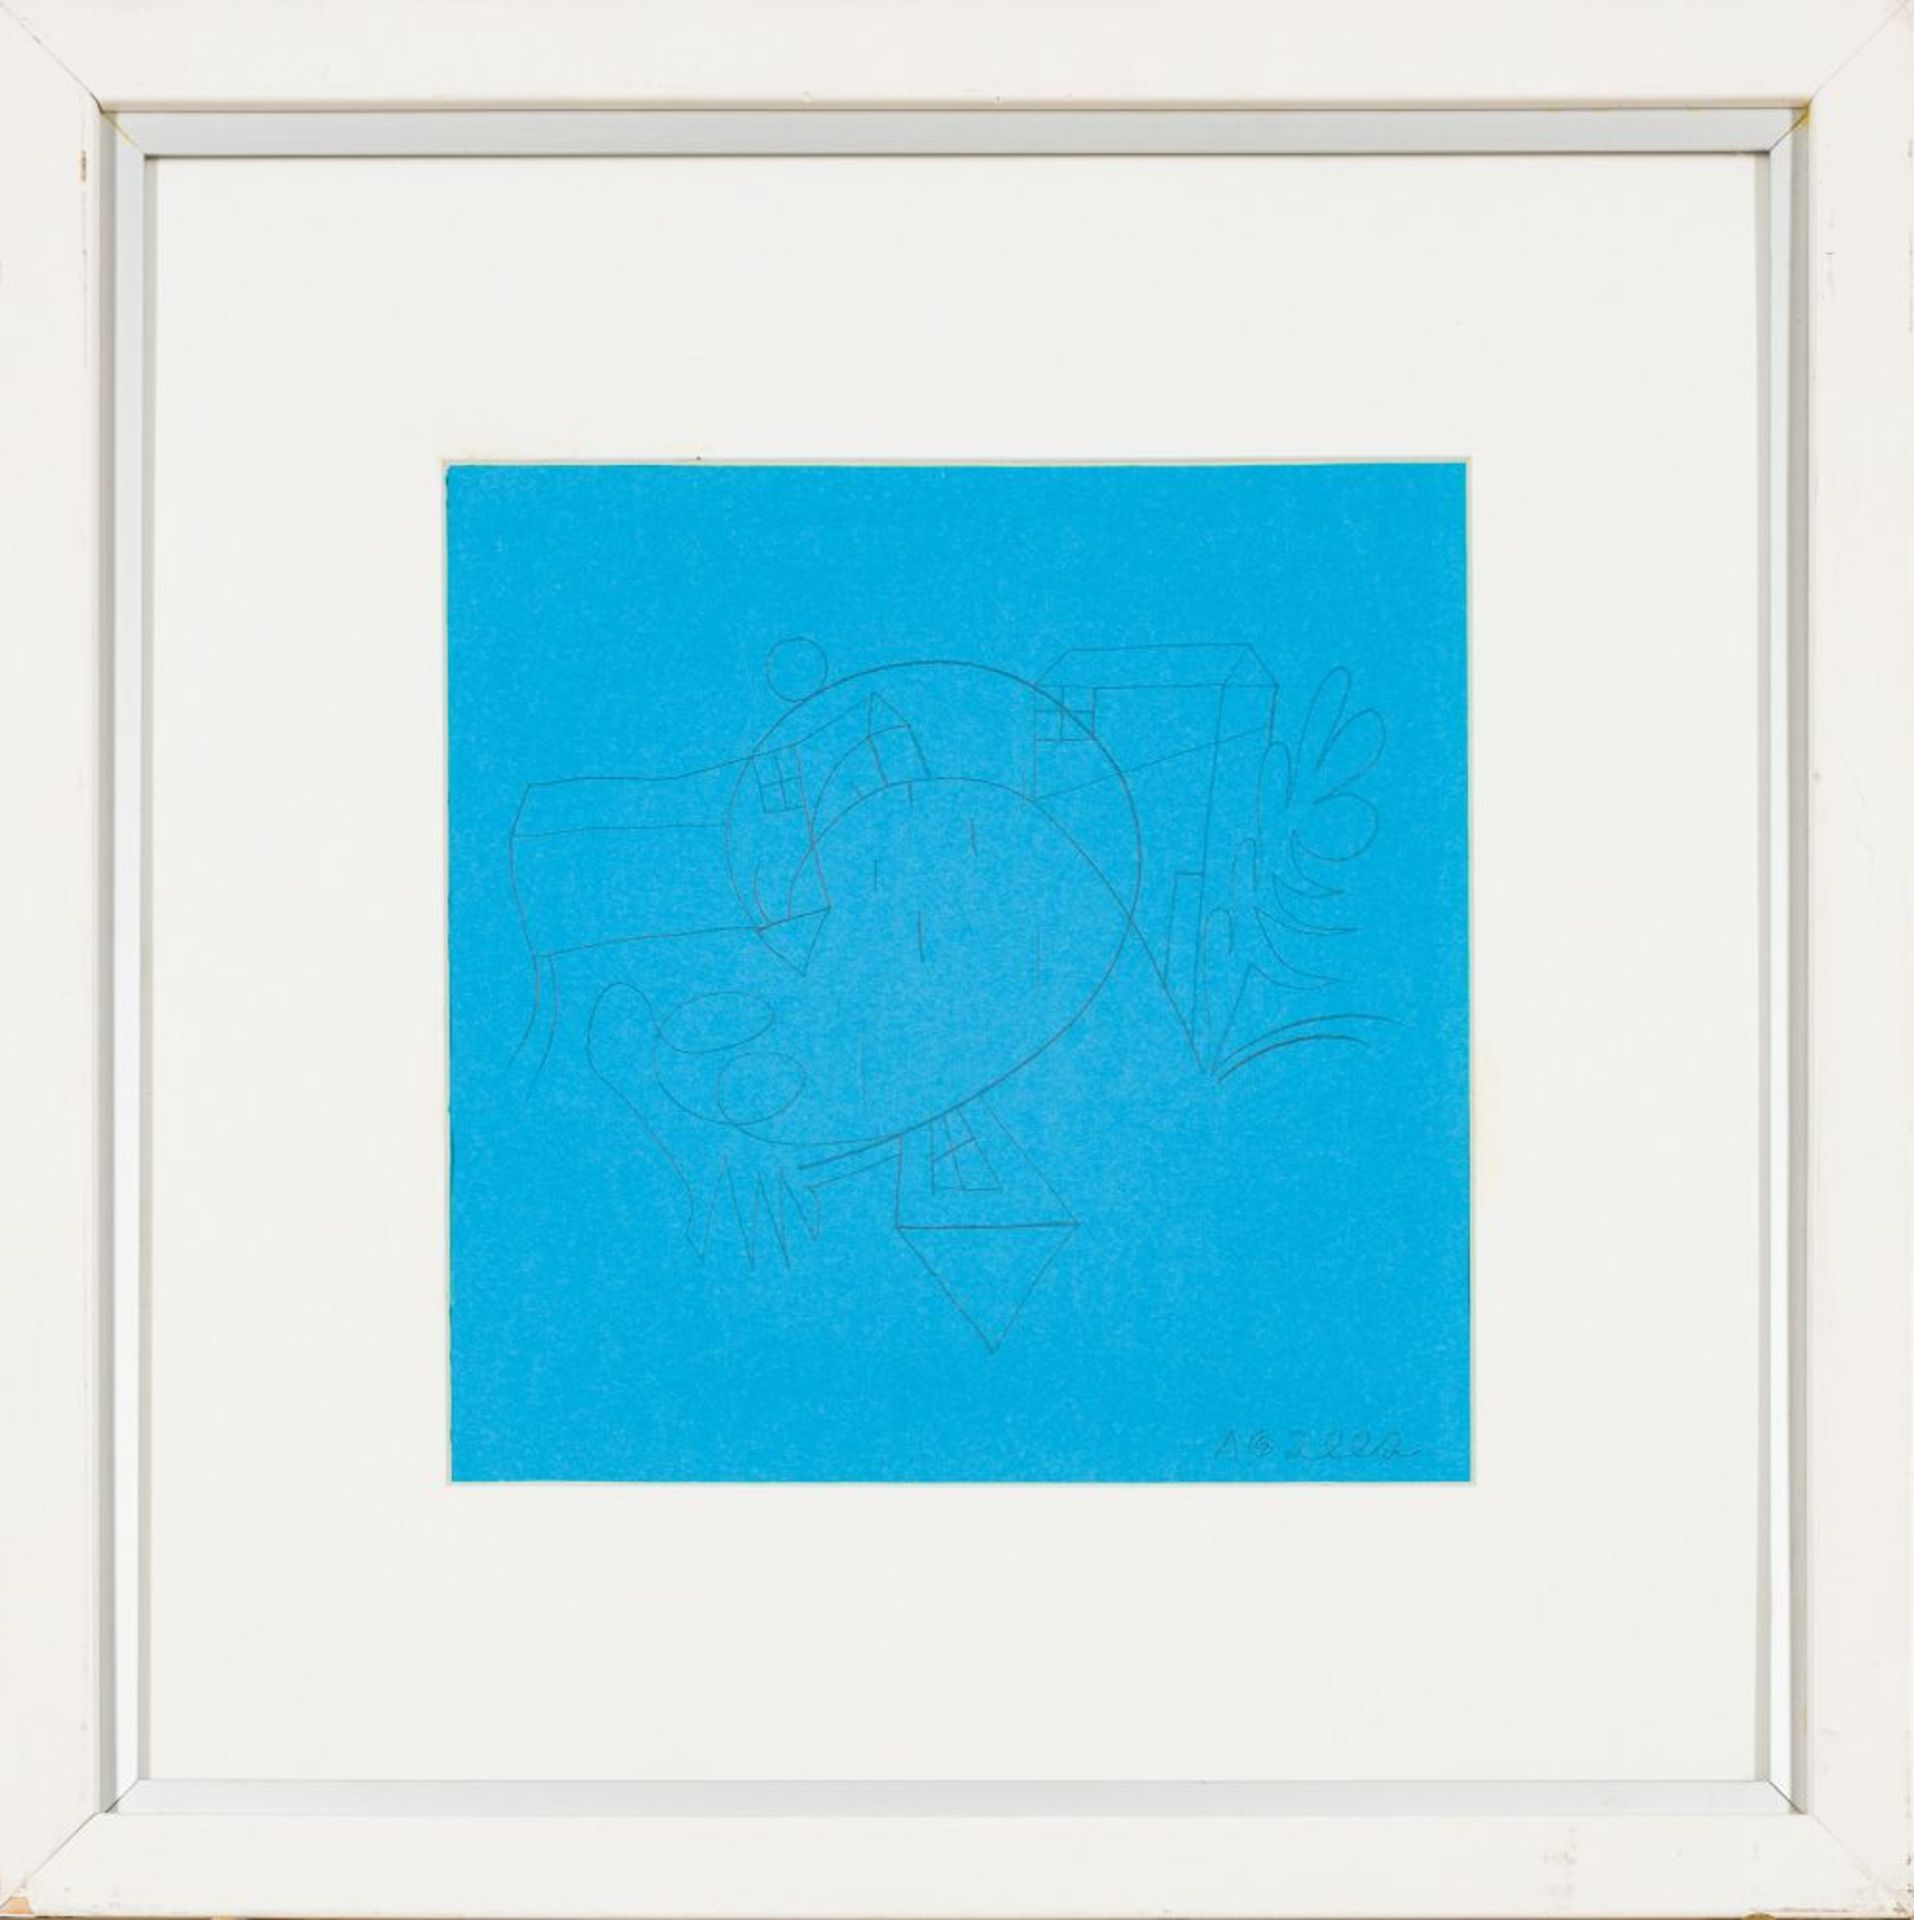 Untitled, 2002 Pencil on blue Paper Monogrammed and dates lower right Passepartout Outcut - Image 2 of 4